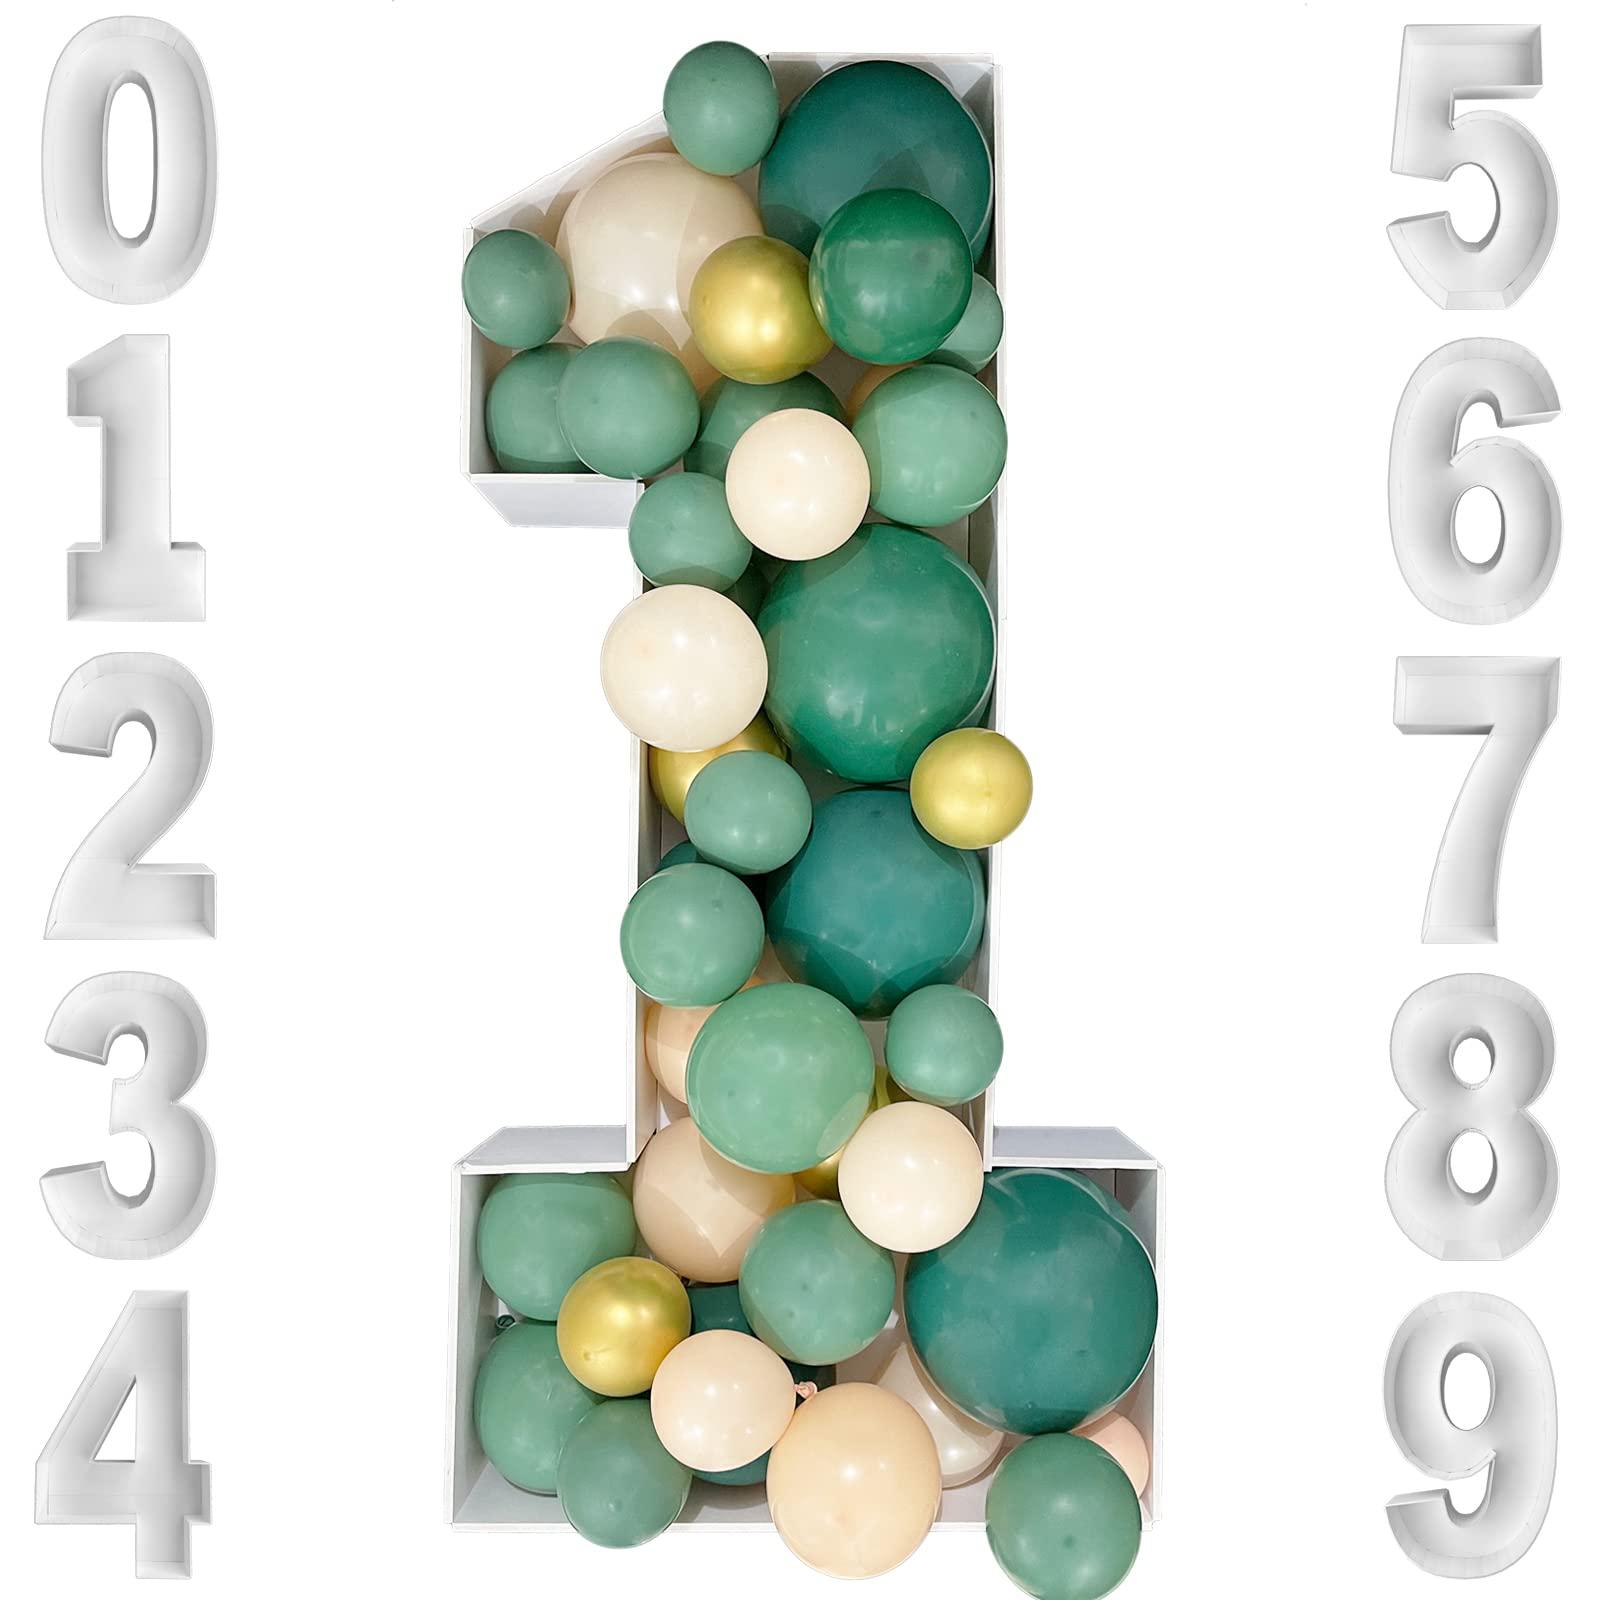 unidemo mosaic numbers for balloons 3.3 ft pre-cut number 1 balloon frame large  cardboard marquee numbers for 1st birthday party deco